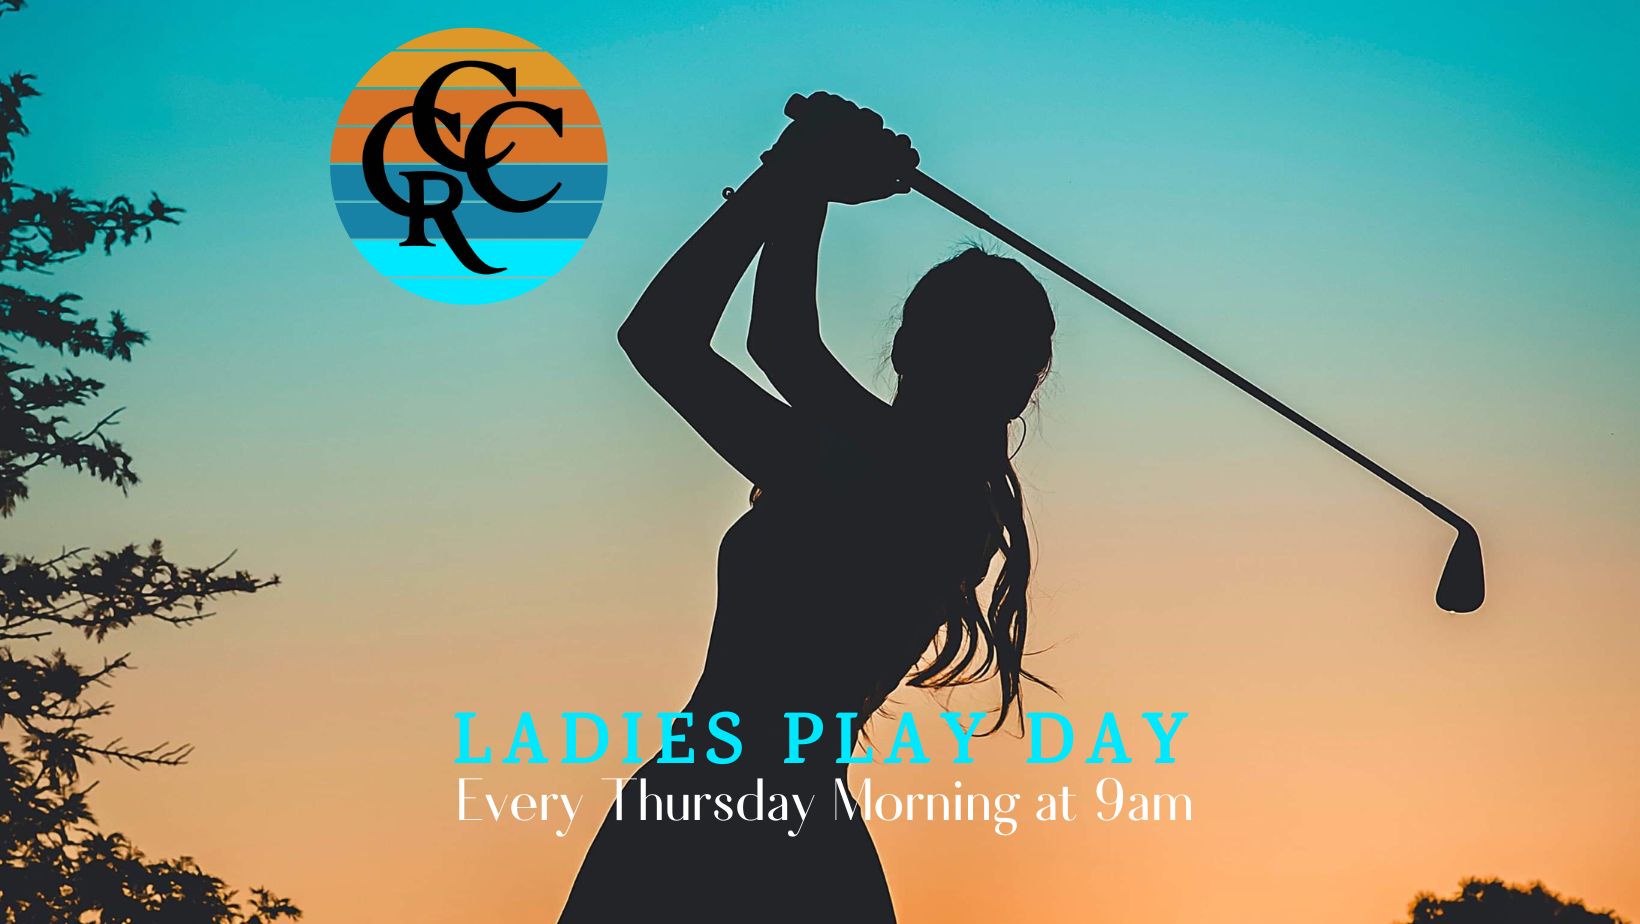 Ladies Play Day Every Thursday